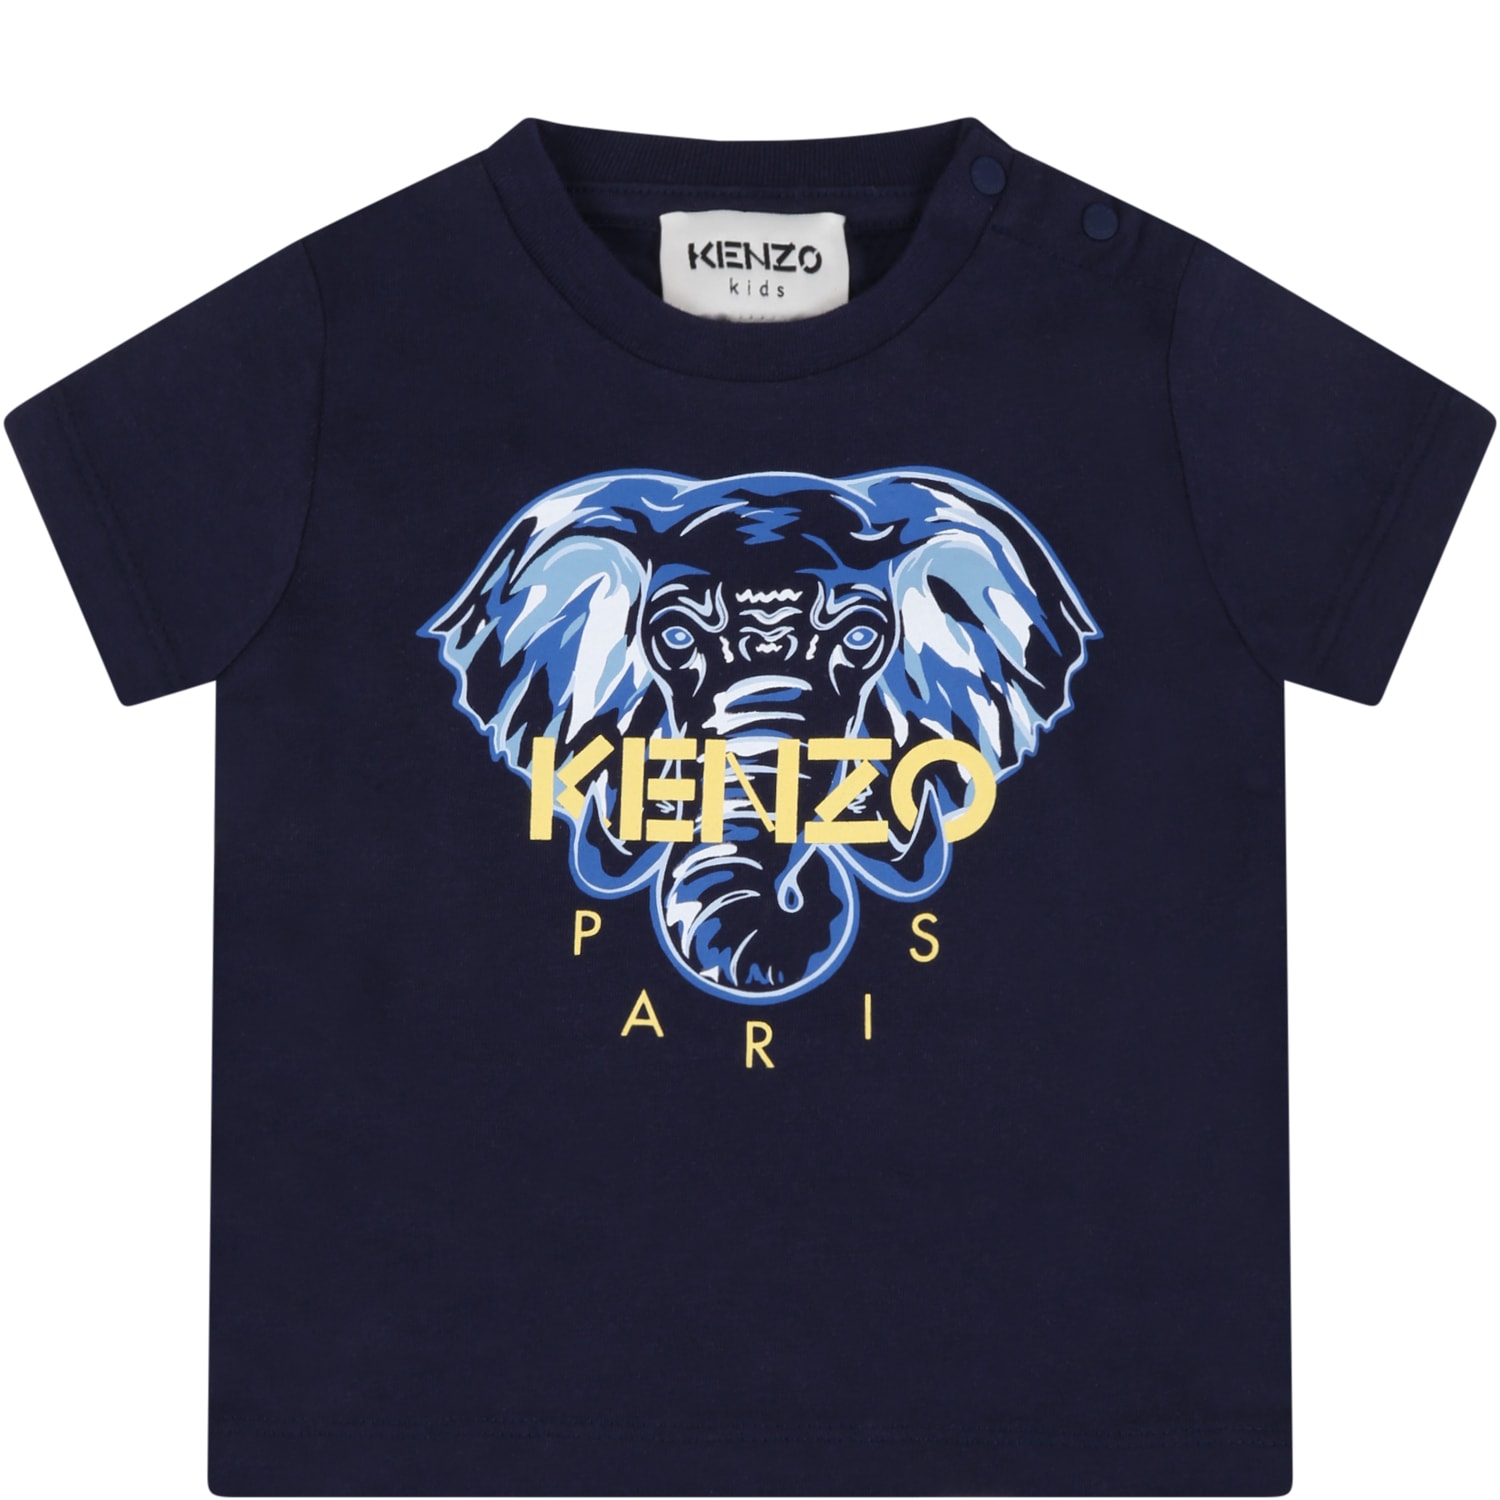 Kenzo Kids Blue T-shirt For Baby Boy With Iconic Elephant